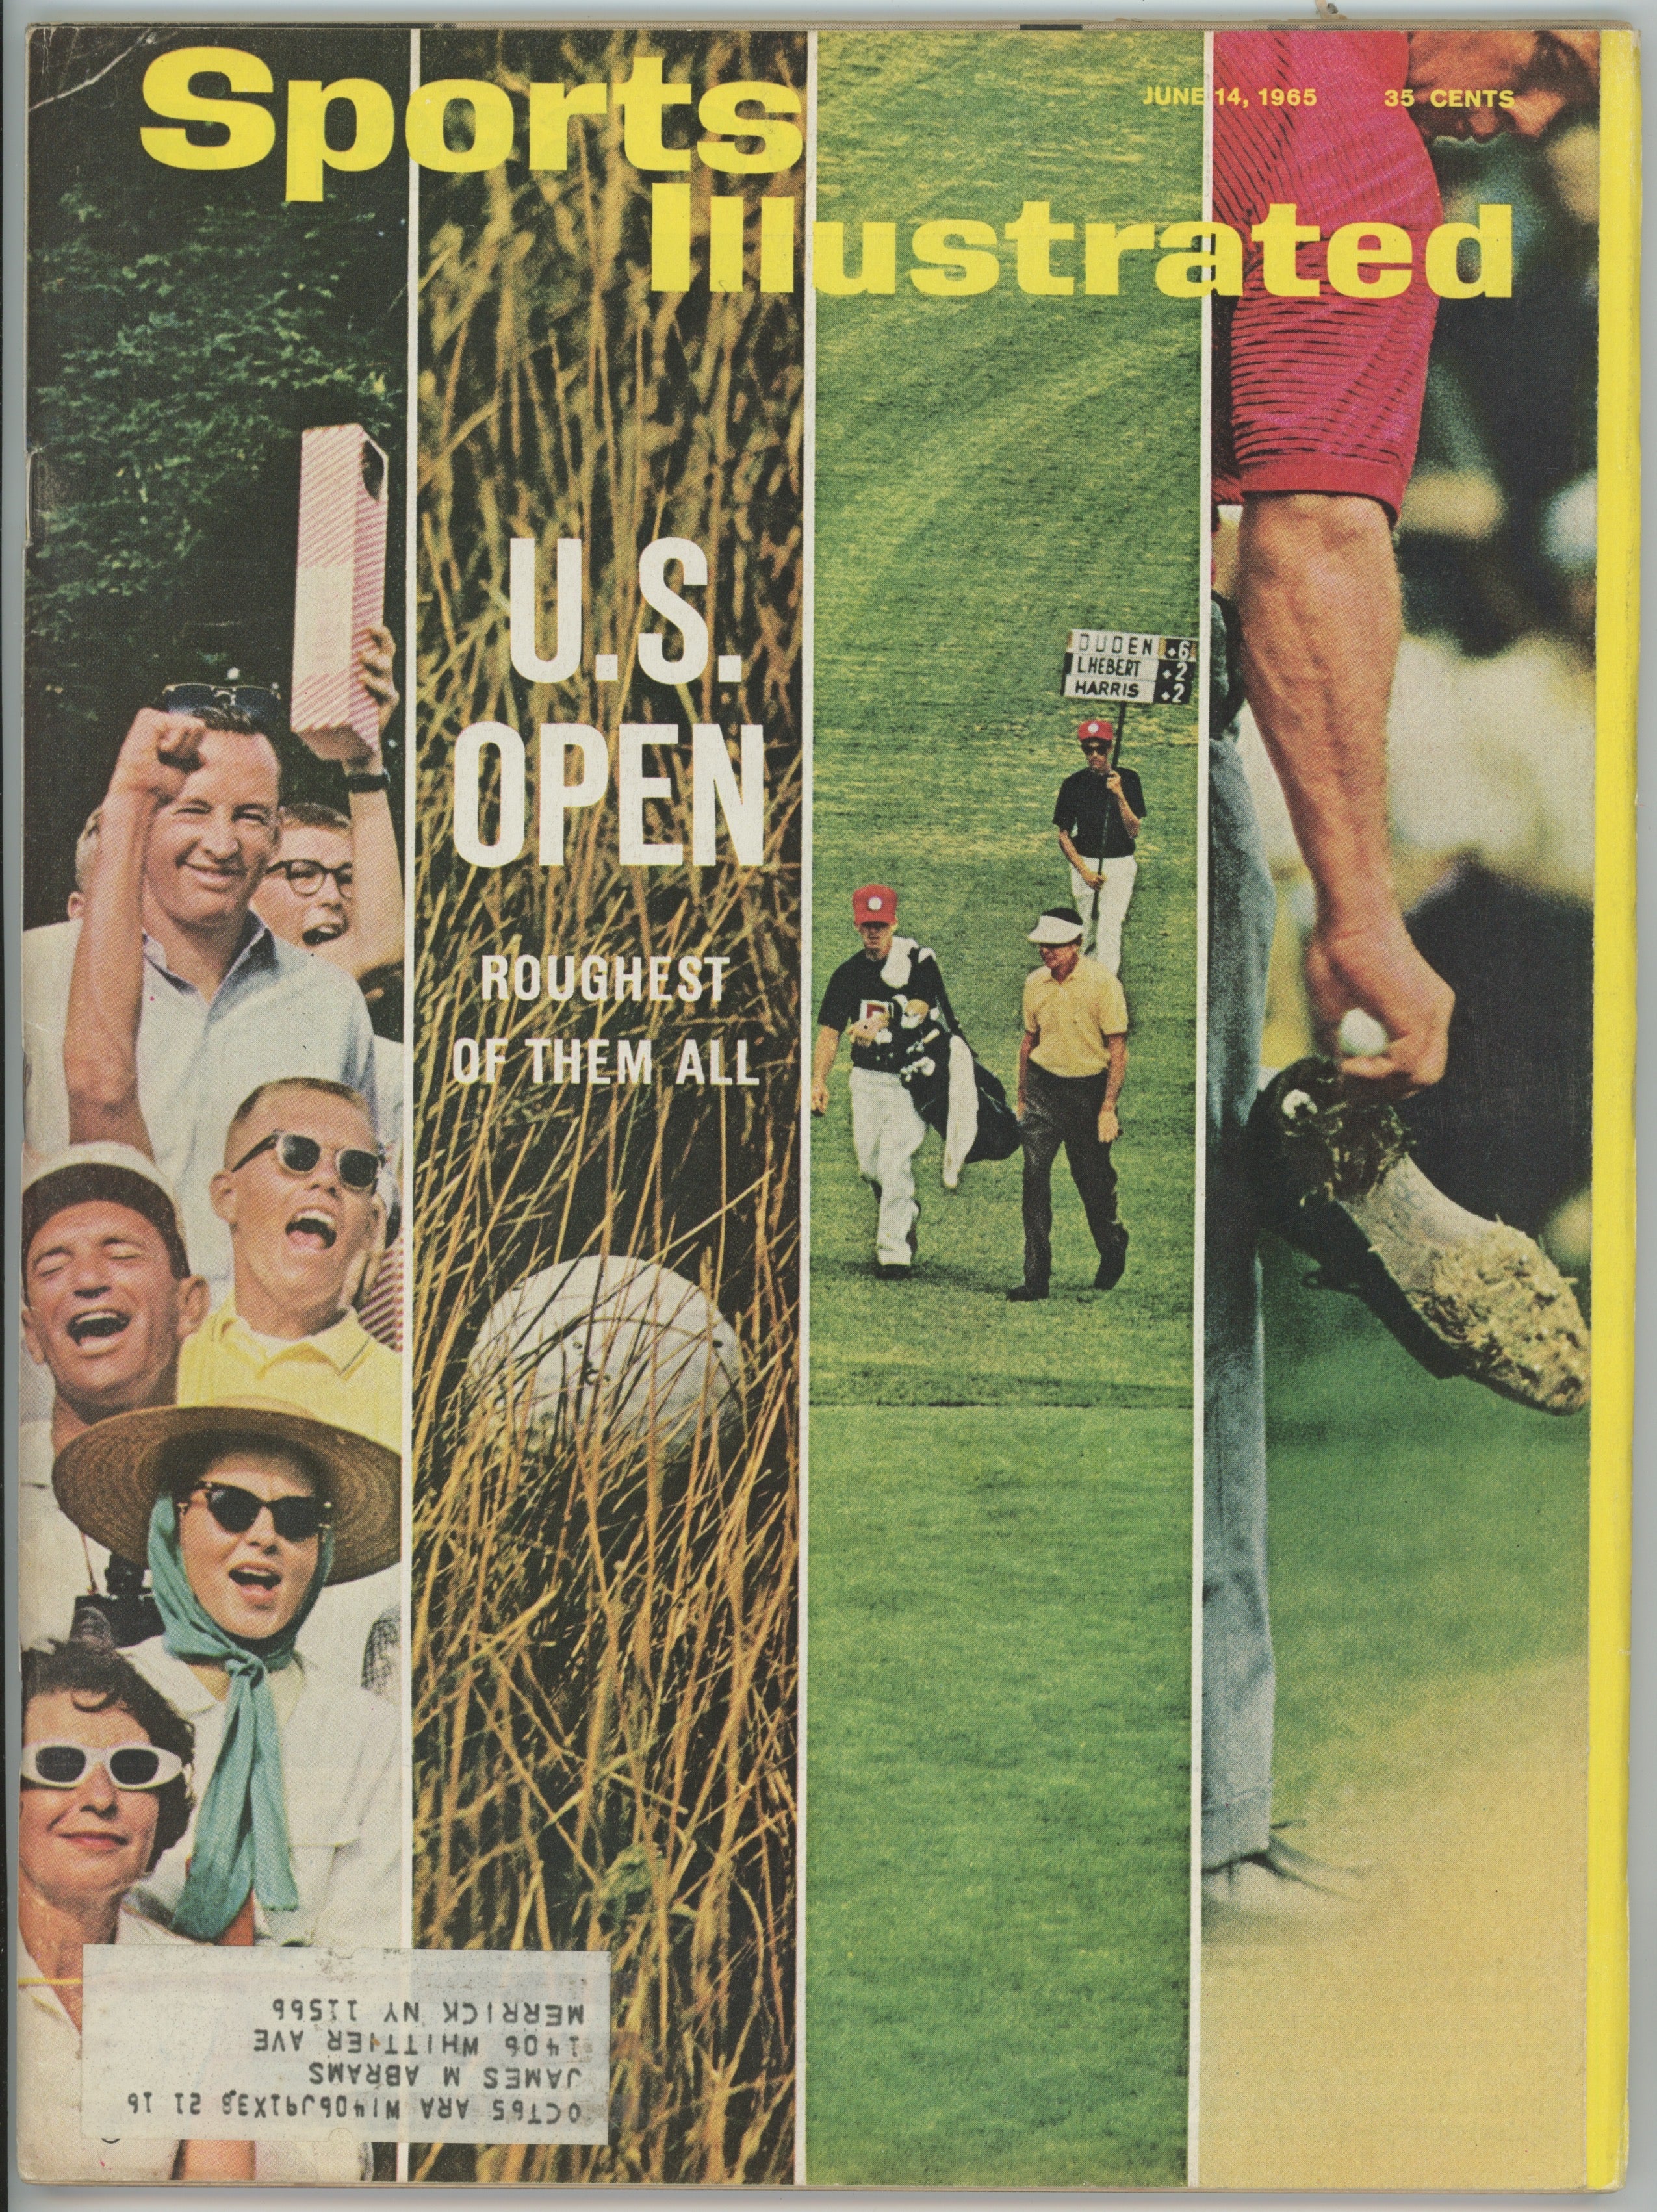 The U.S. Open “Roughest of Them All” 6/14/65 EX ML